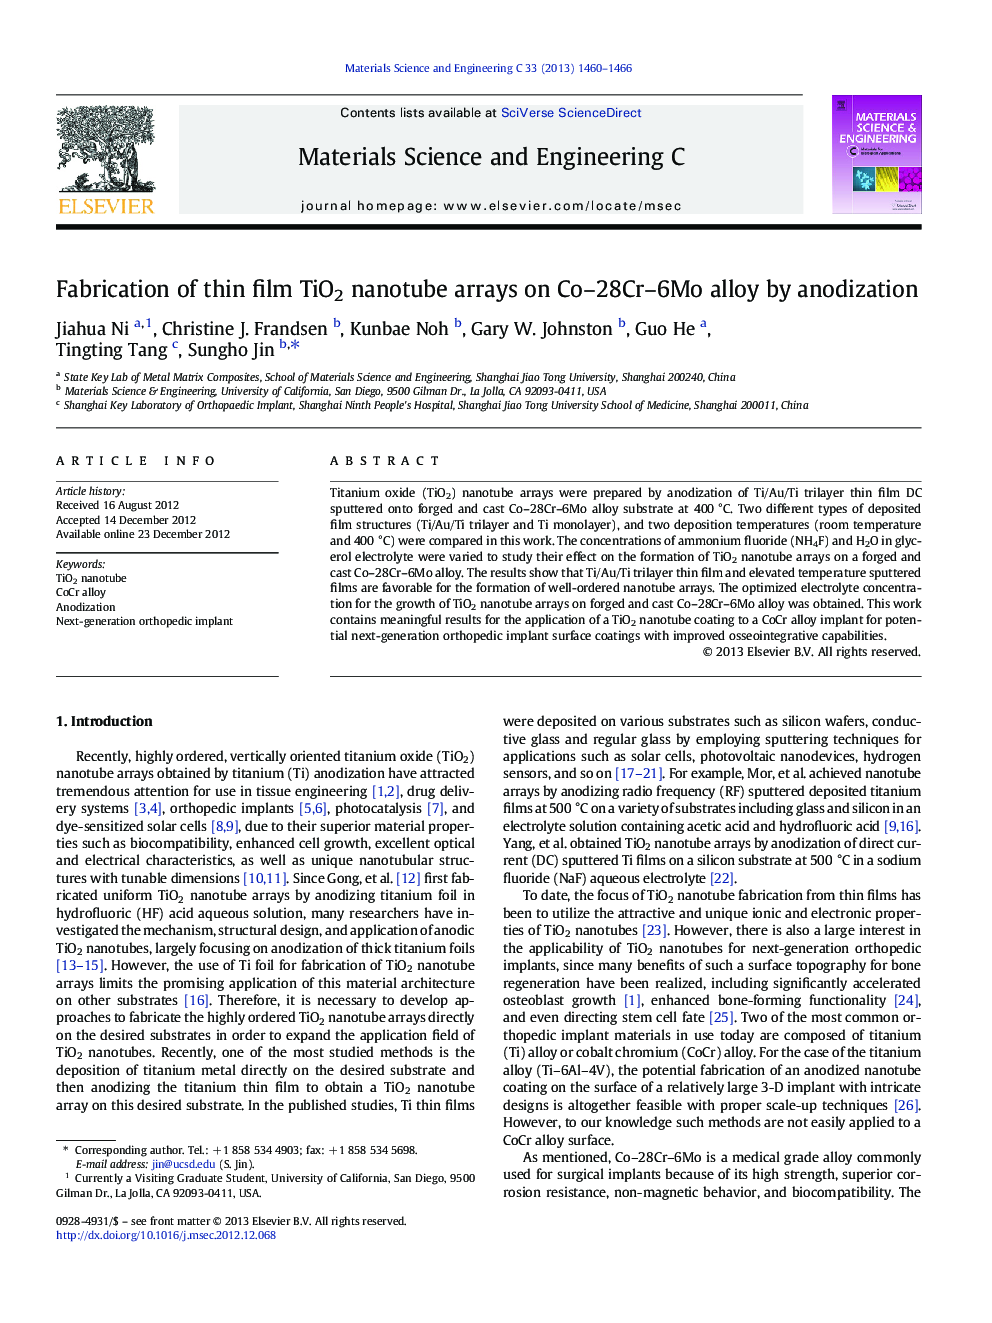 Fabrication of thin film TiO2 nanotube arrays on Co-28Cr-6Mo alloy by anodization